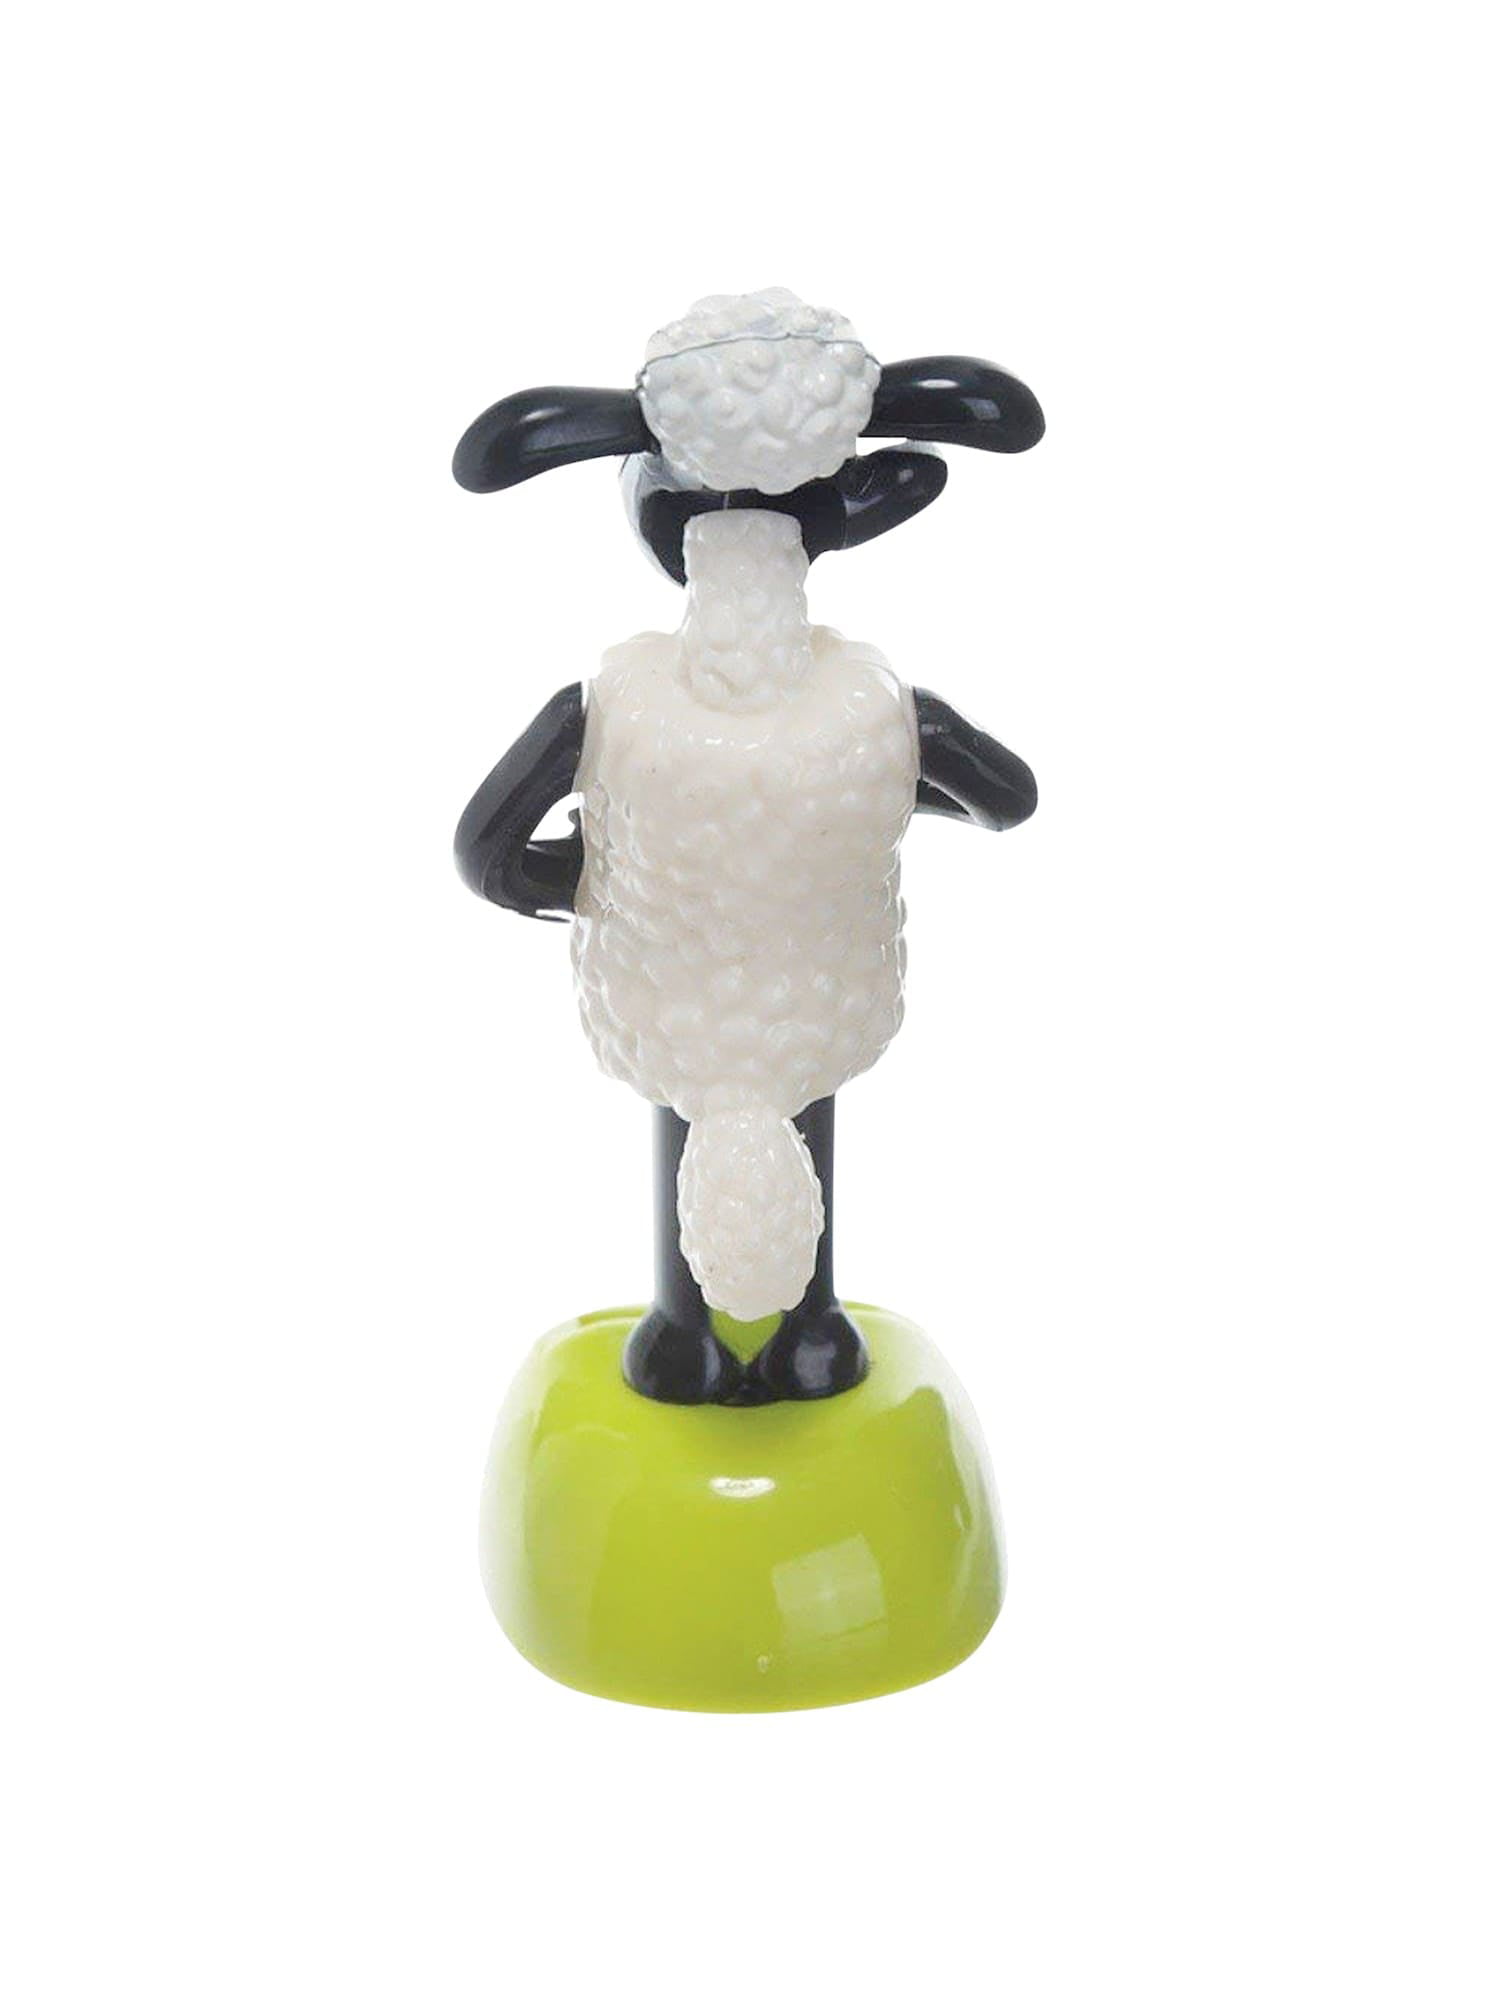 Solar Power/Powered ~ SHAUN THE SHEEP ~ No Batteries Required Wallace & Gromit 